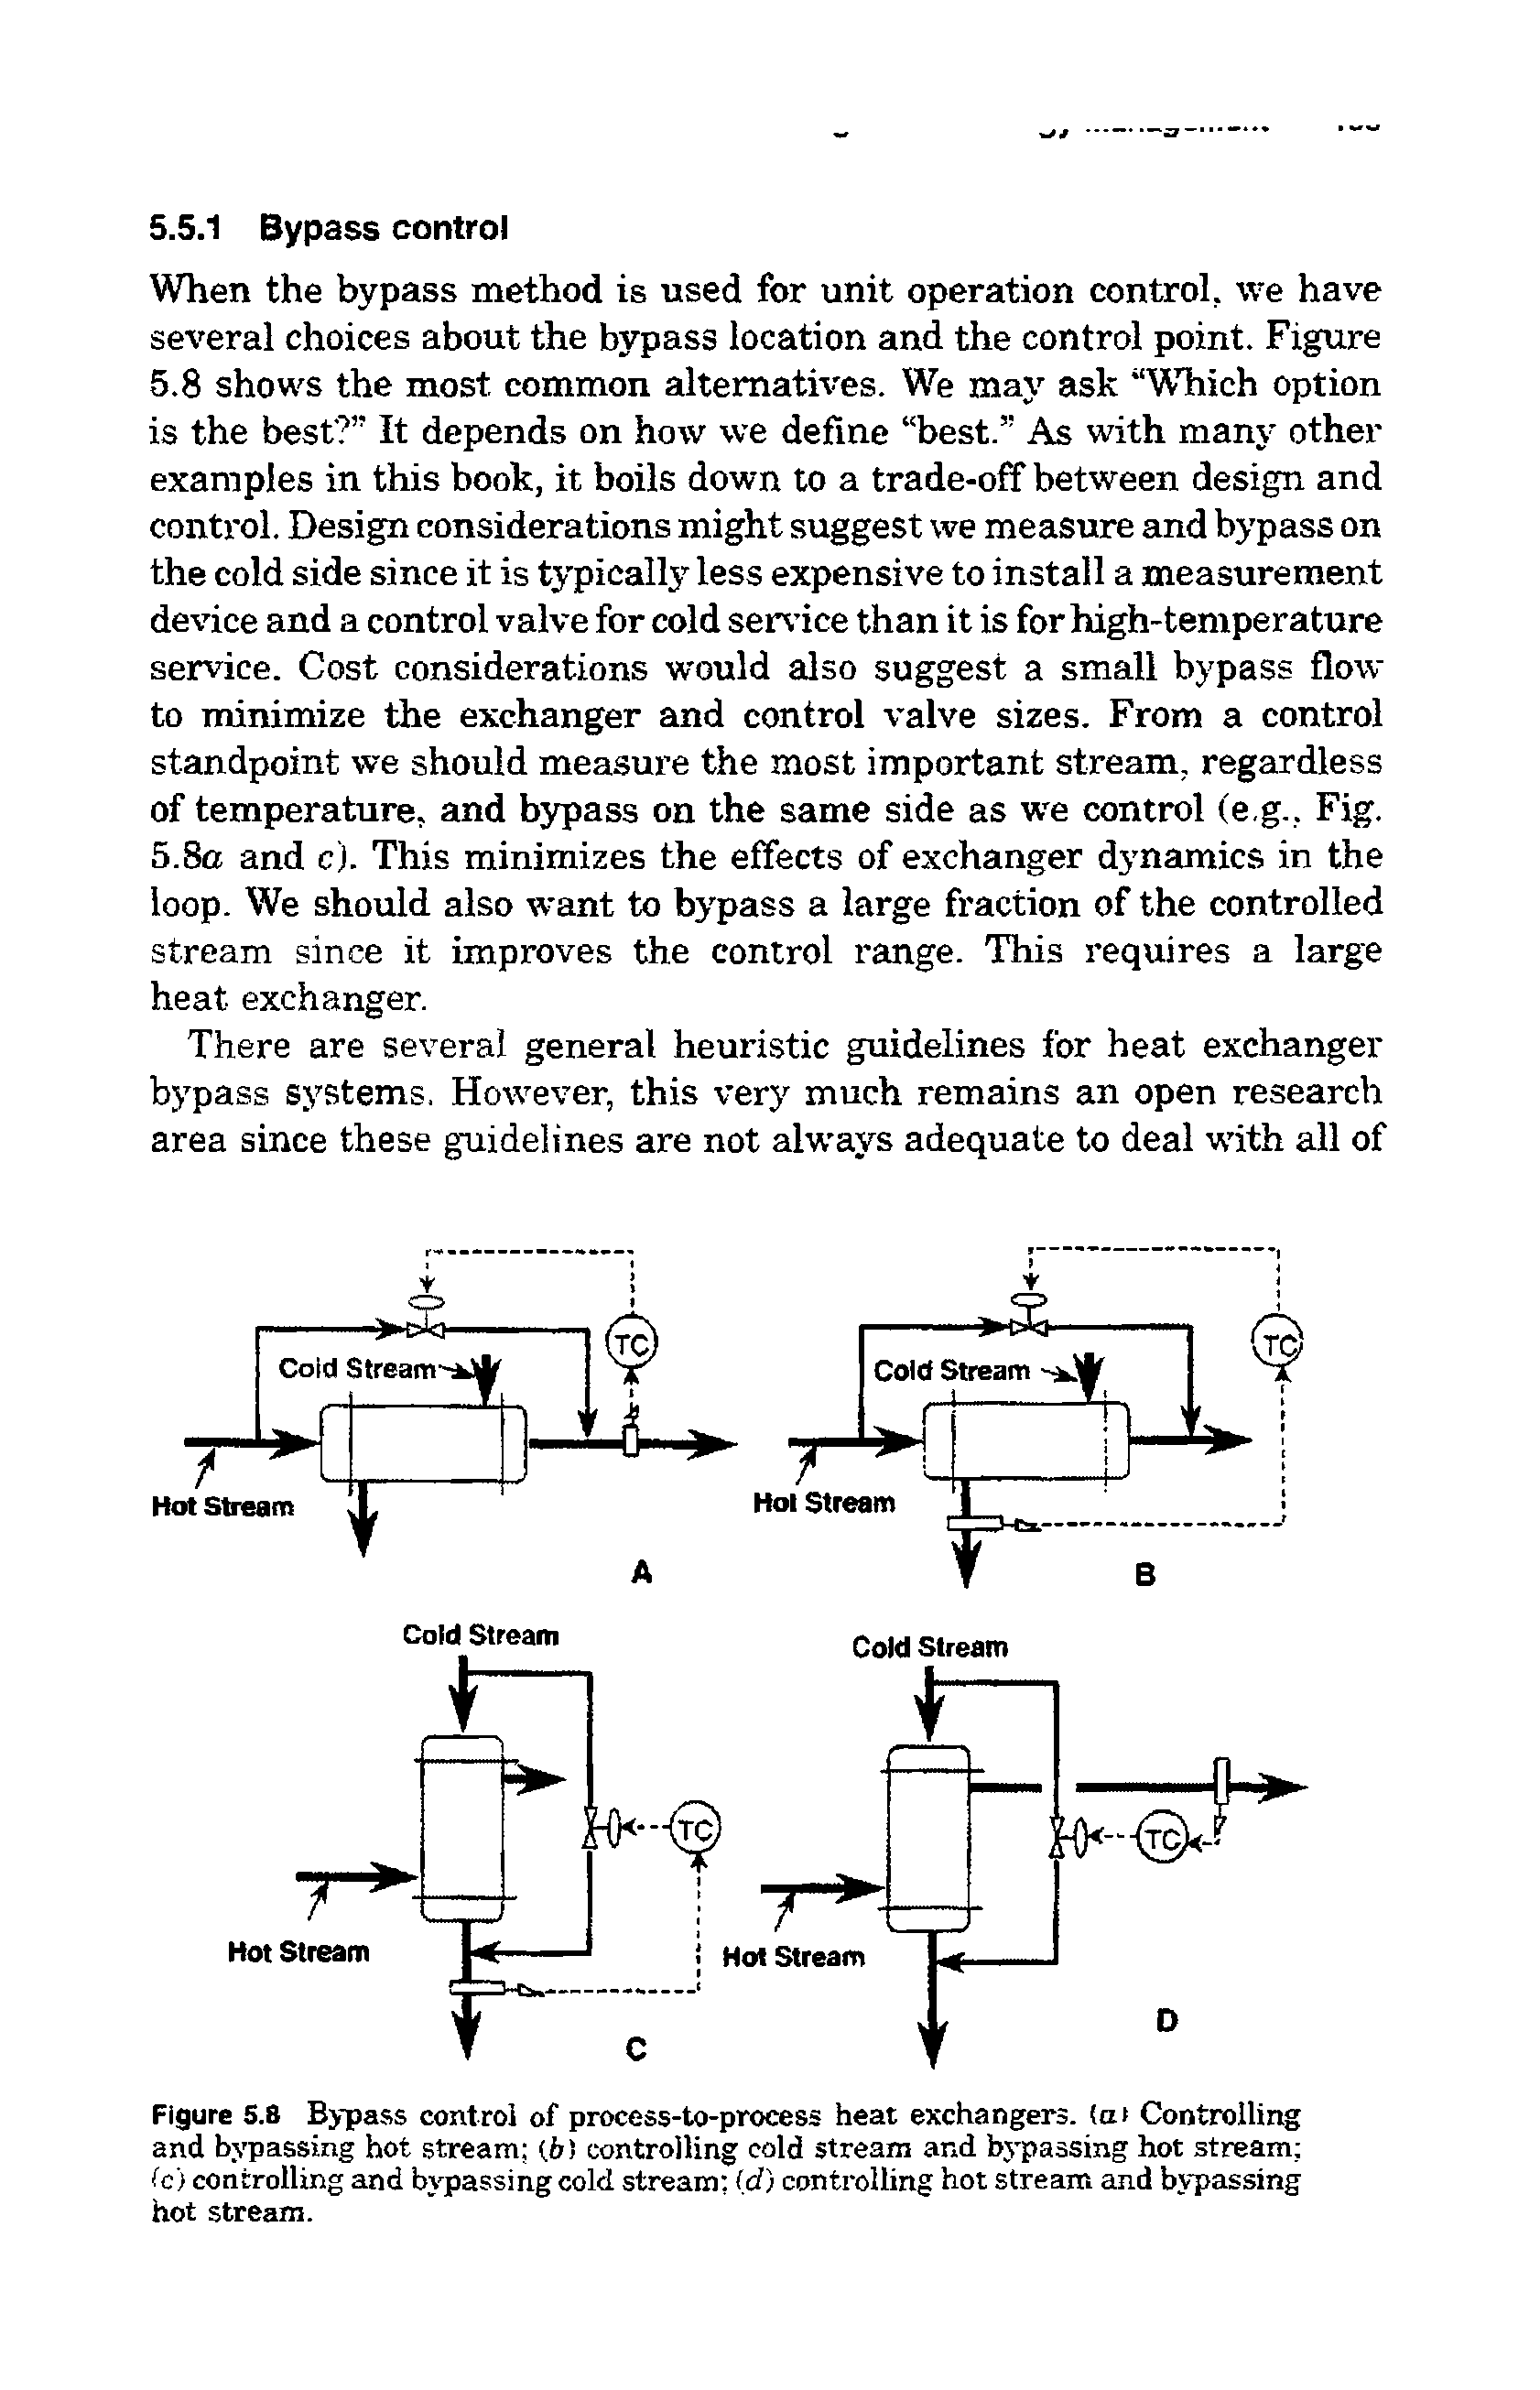 Figure 5.8 Bypass control of process-to-process heat exchangers, (at Controlling and bypassing hot stream (b) controlling cold stream and bypassing hot stream <c) controlling and bypassing cold stream (d) controlling hot stream and bypassing hot stream.